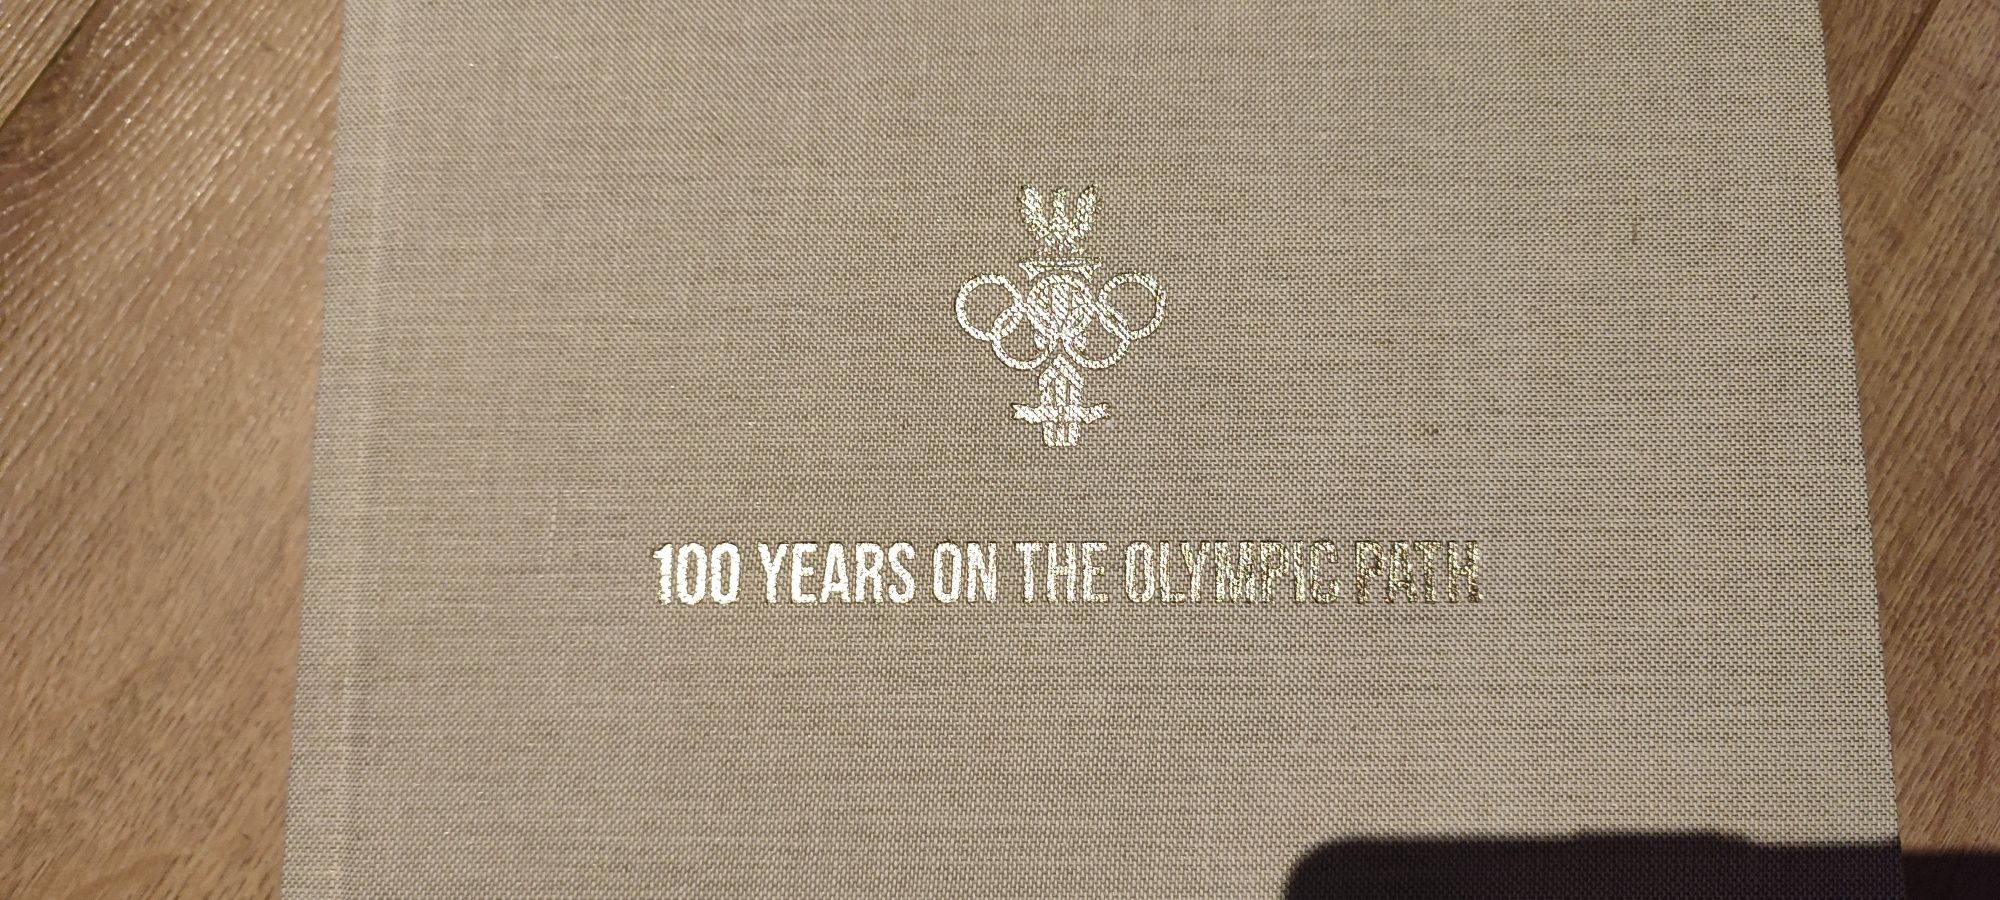 100 years on the olympic path